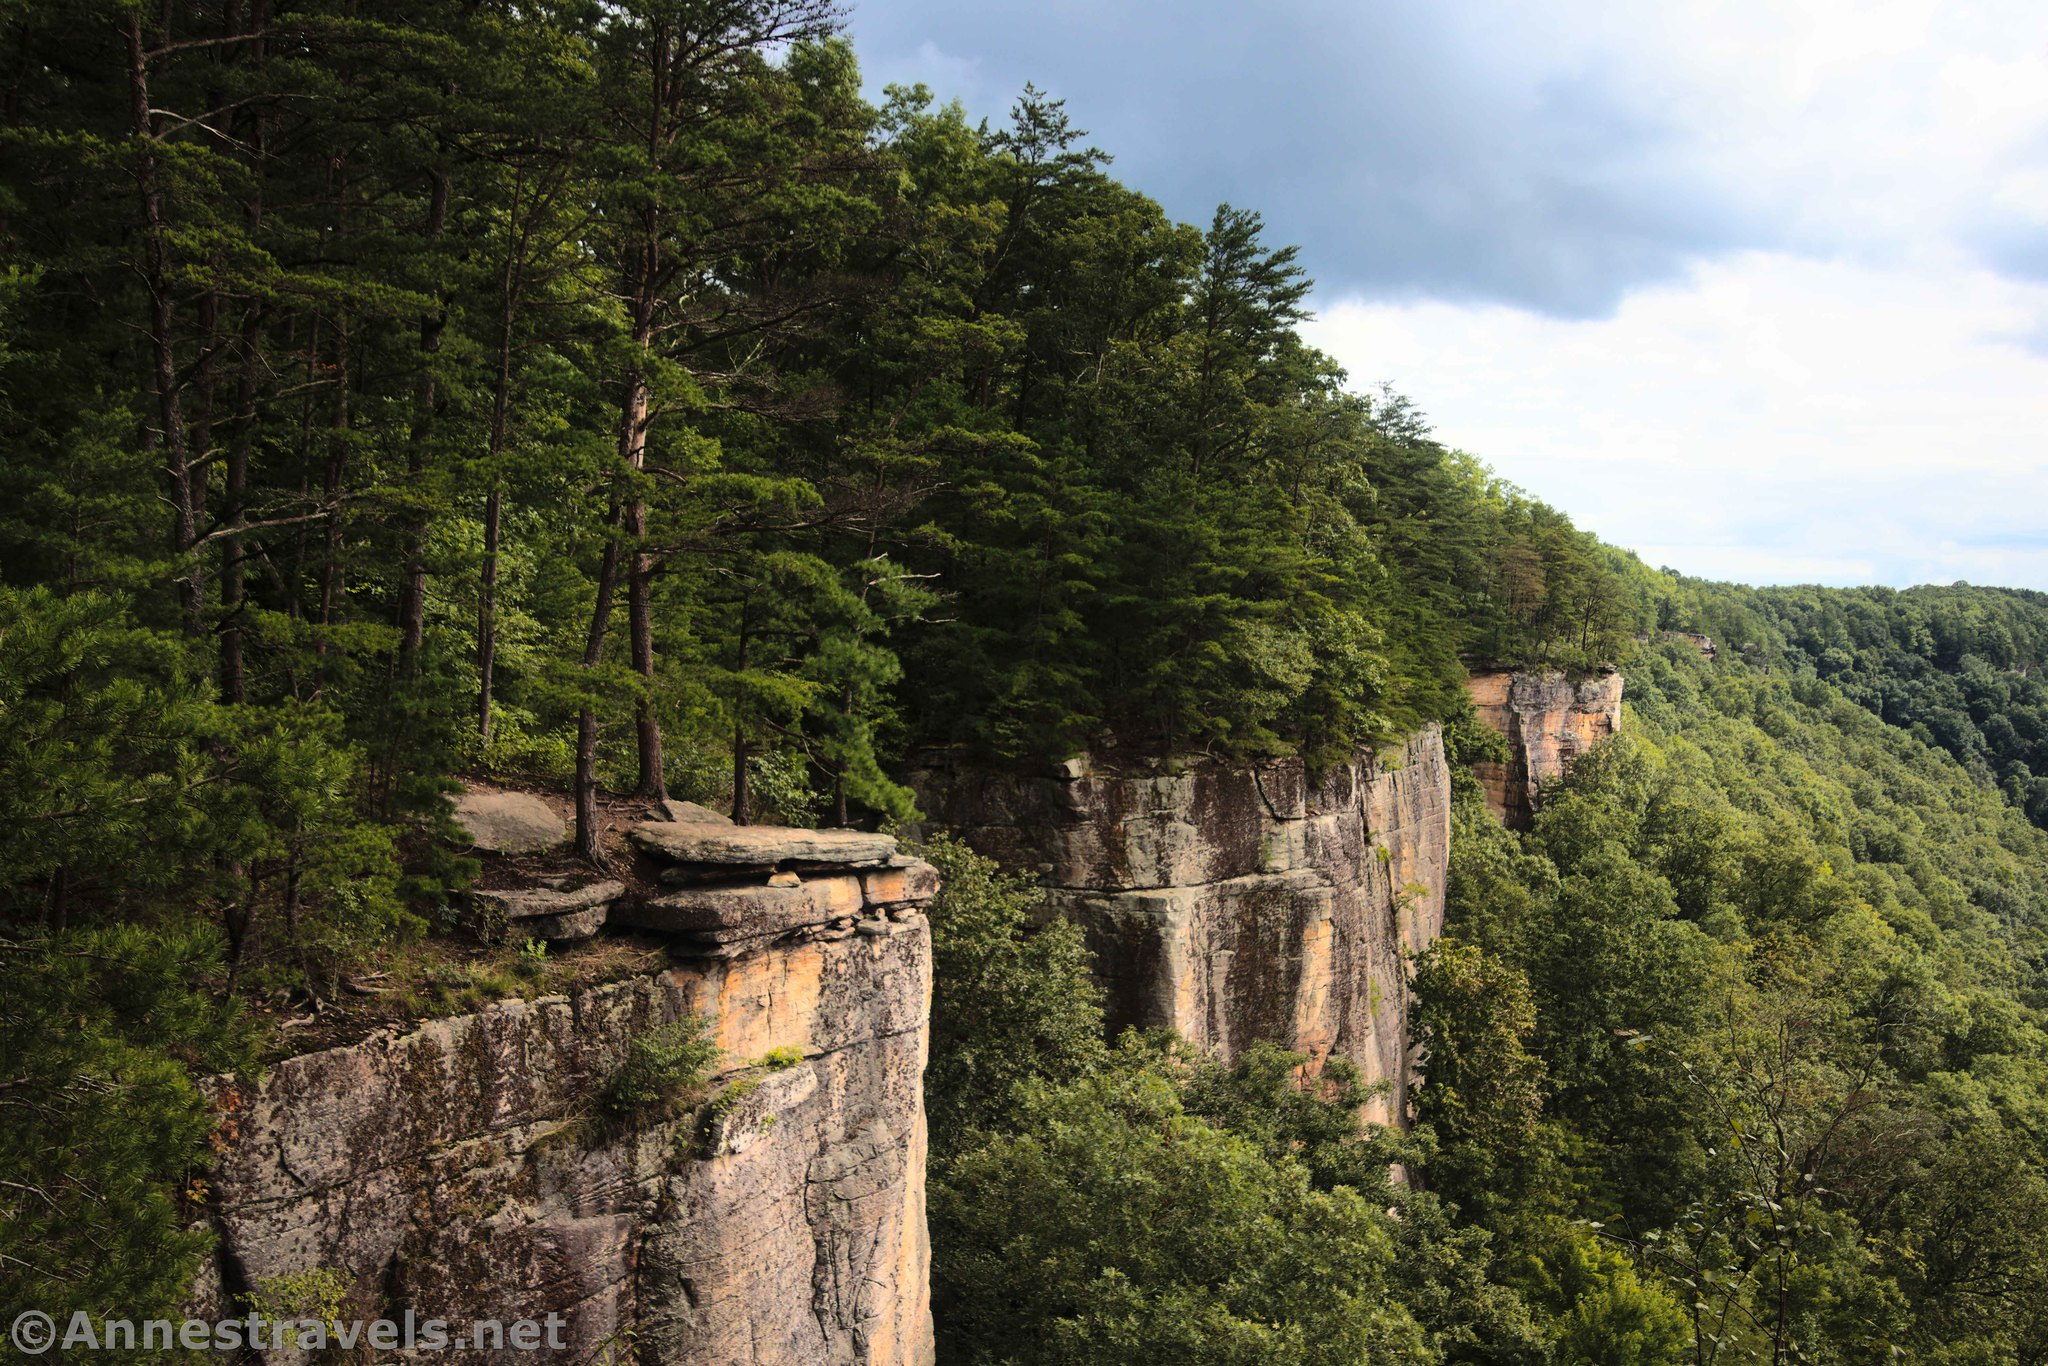 Cliffs of the Endless Wall in New River Gorge National Park, West Virginia